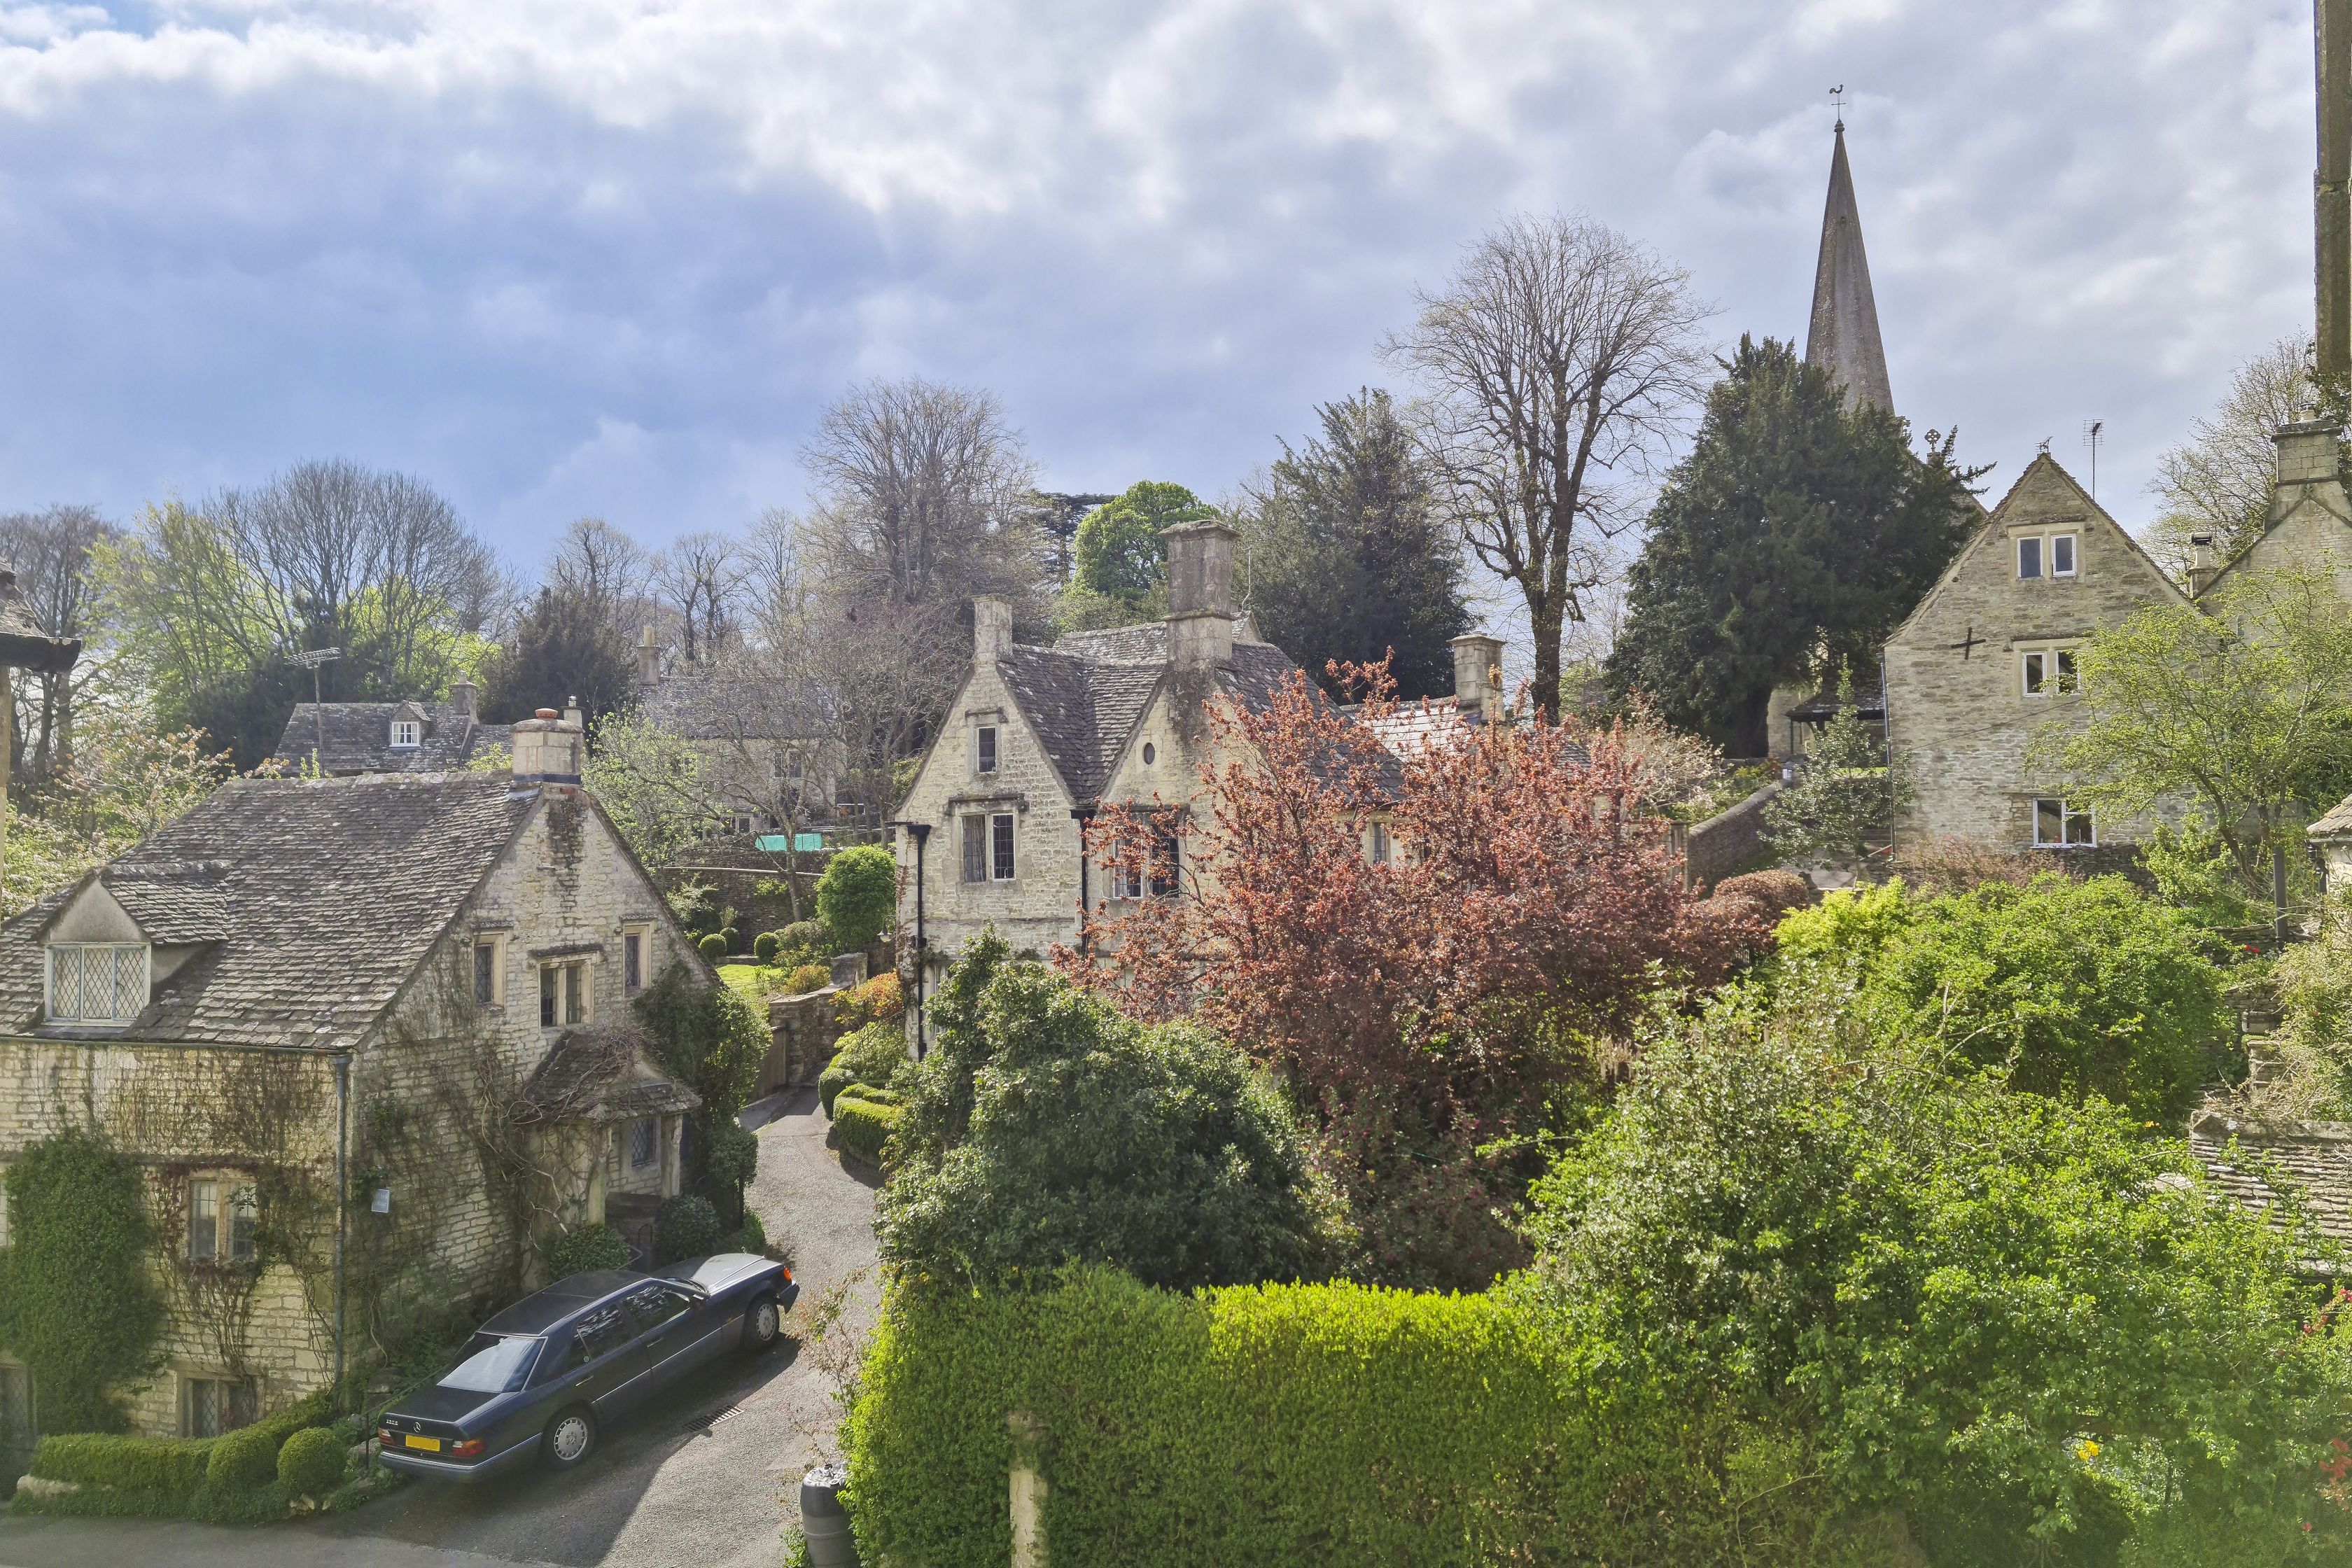 32A1050 | Fine & Country - Property Feature - High Street, Bisley